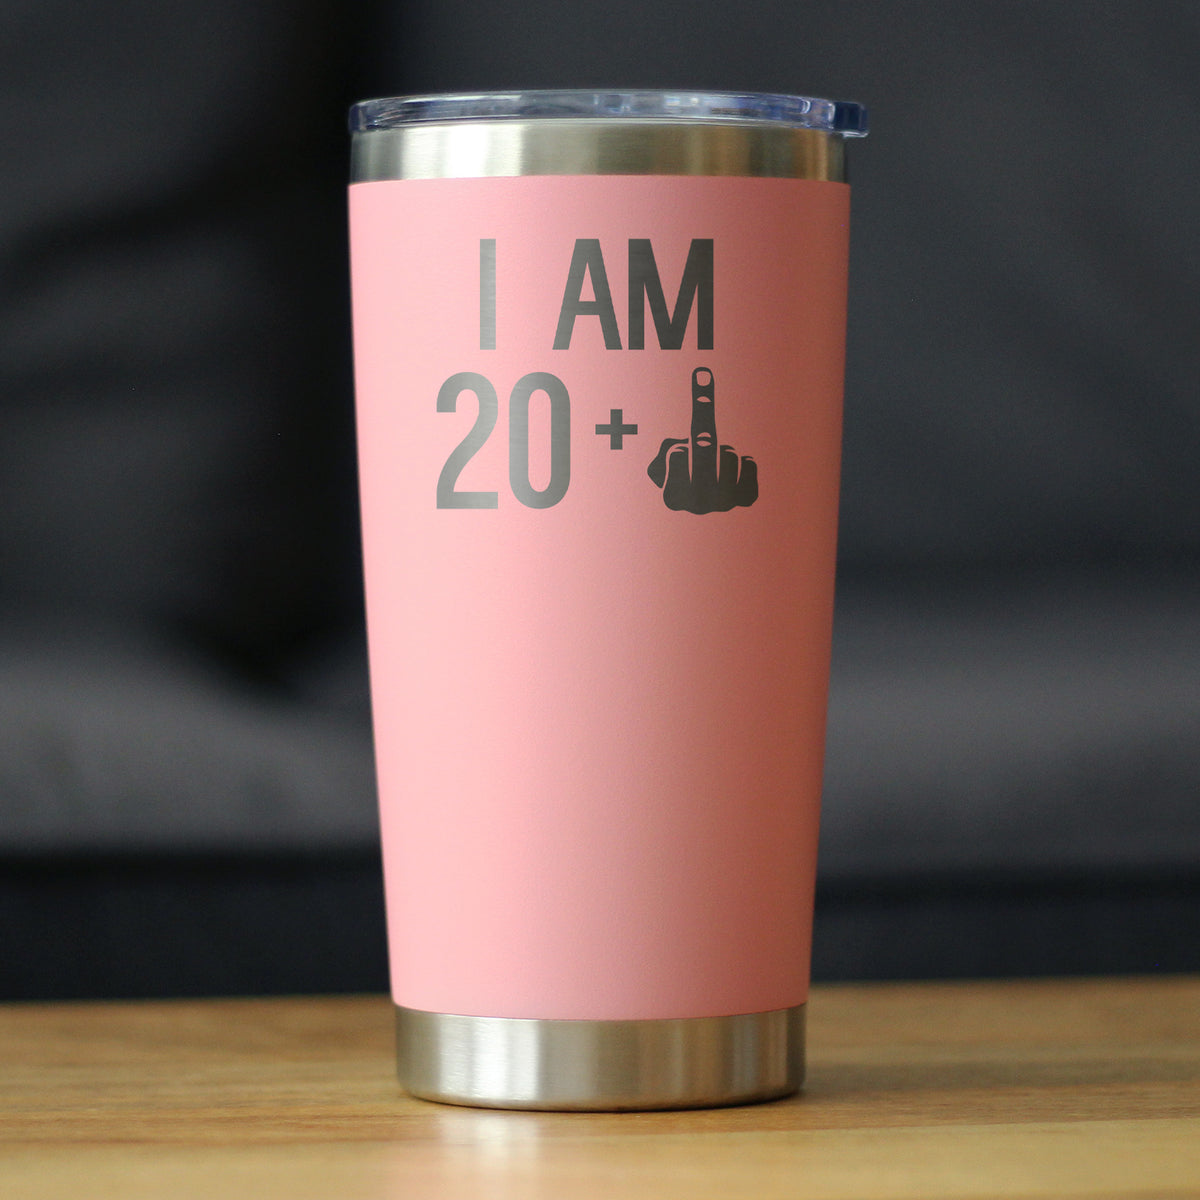 20 + 1 Middle Finger - Insulated Coffee Tumbler Cup with Sliding Lid - 20 oz - Funny 21st Birthday Gift for Women or Men Turning 21